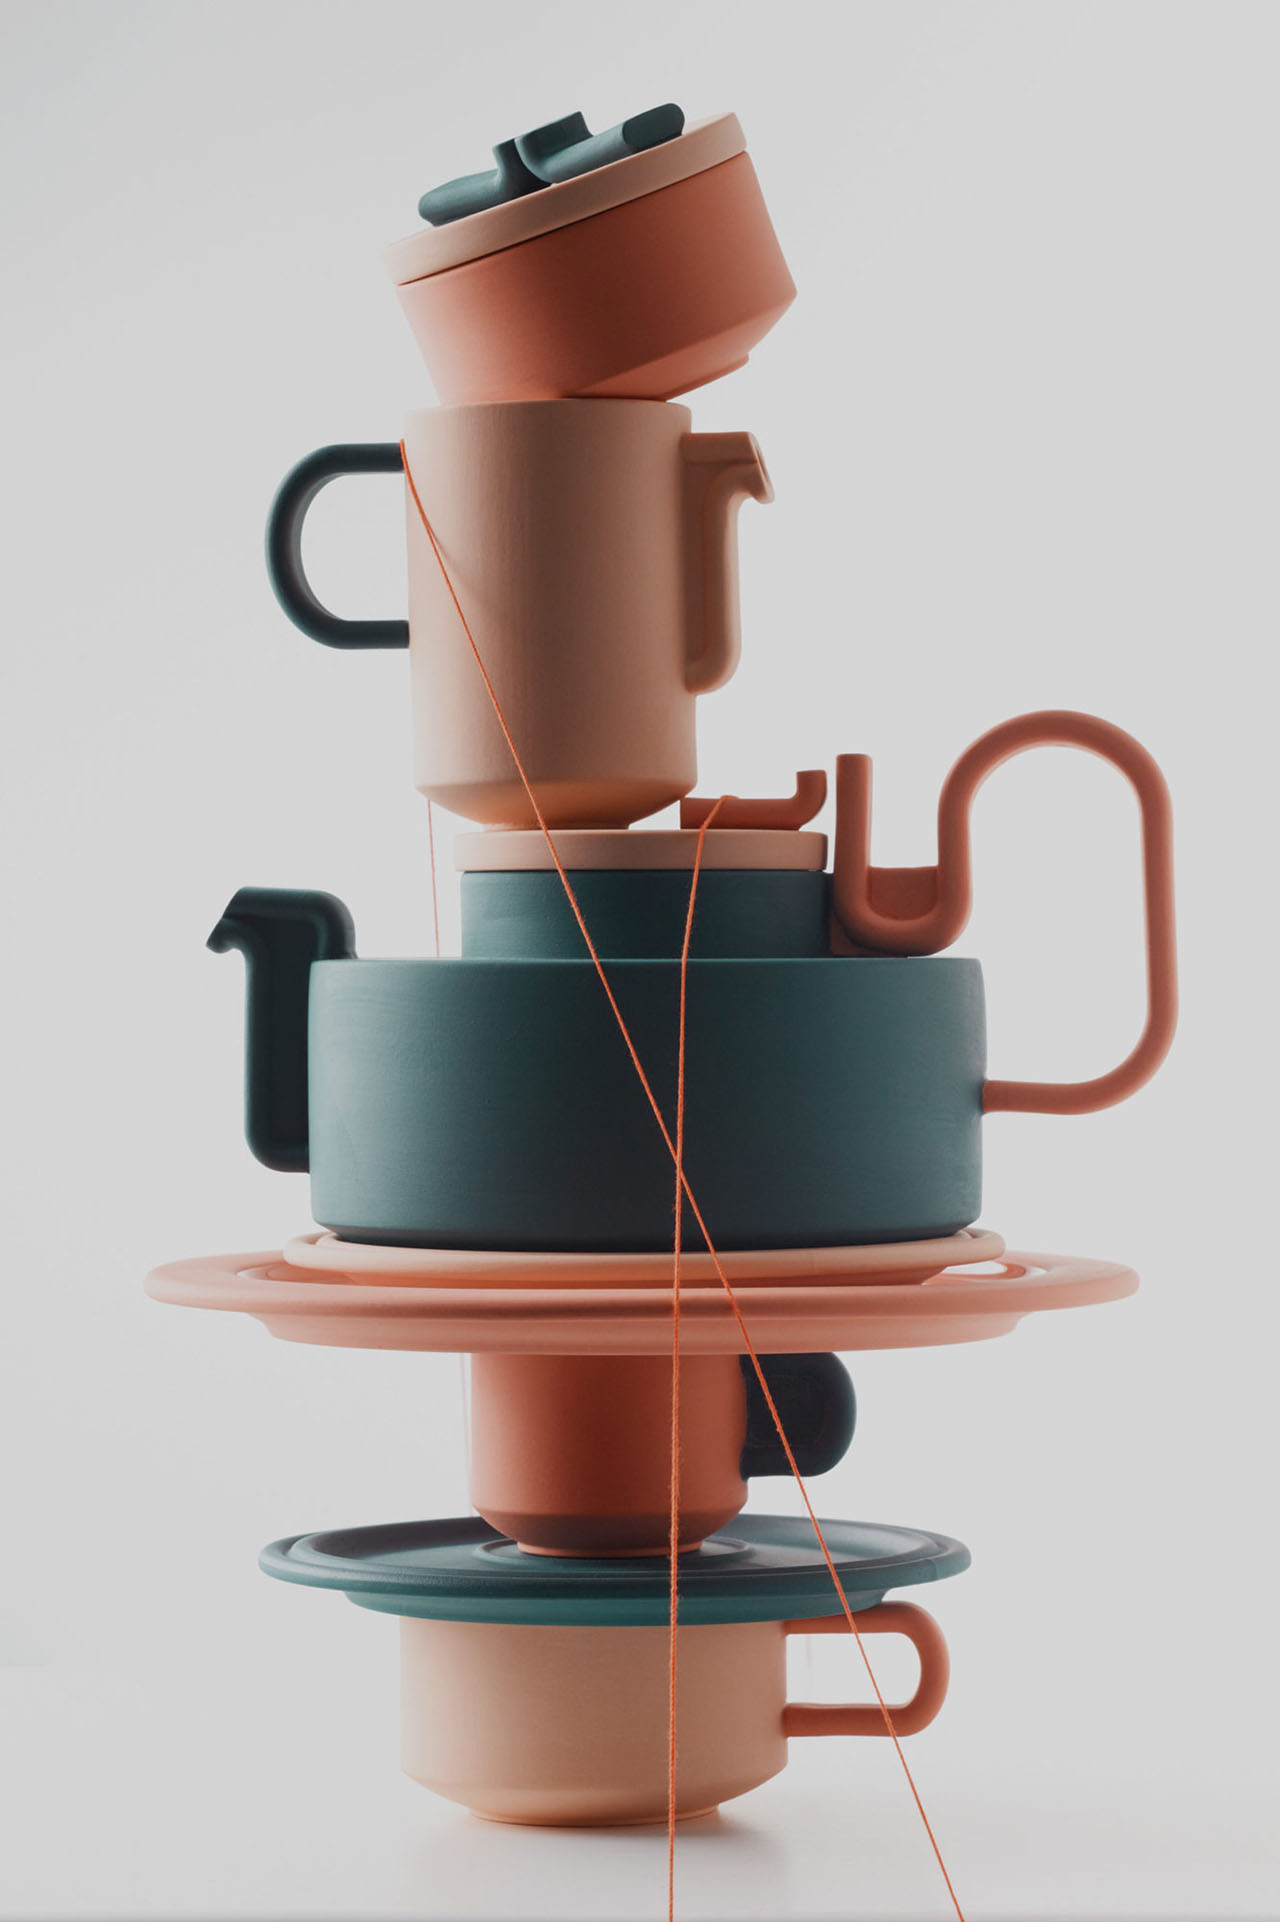 TONGUE tea service series by Bethan Laura Wood for Rosenthal.